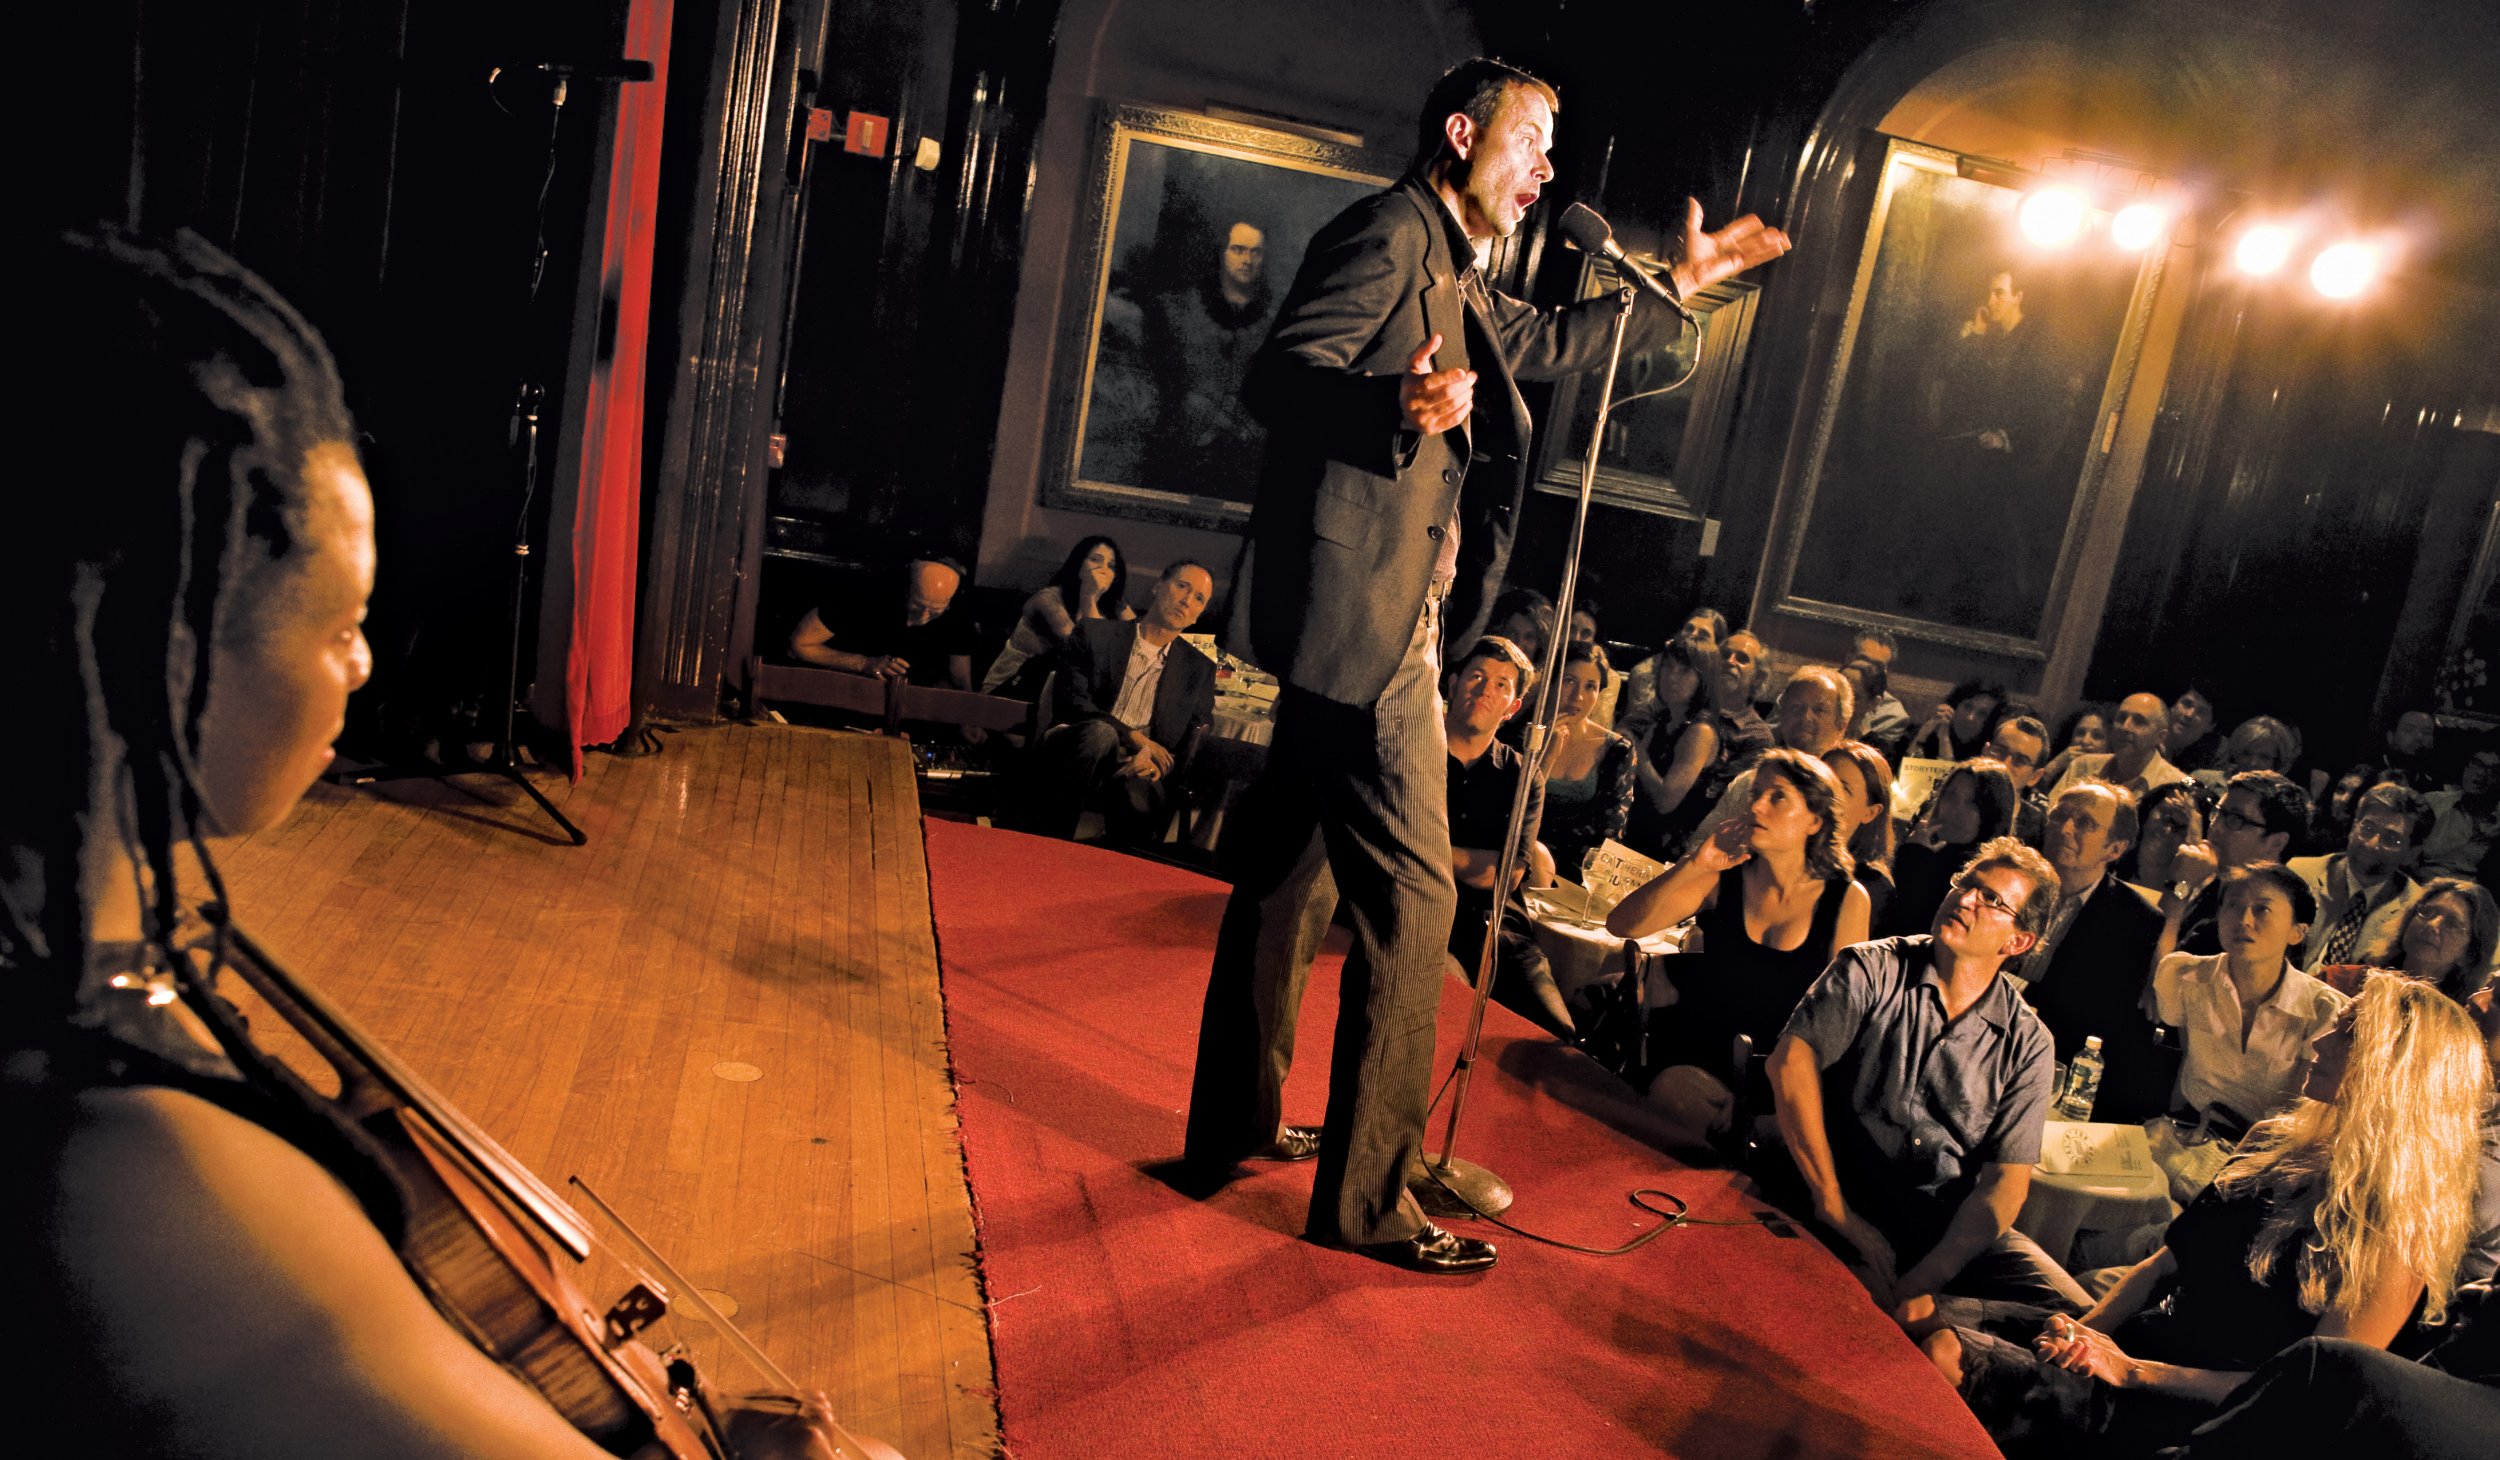 Have We Got a Story for You: 18 Years of Storytelling at The Moth